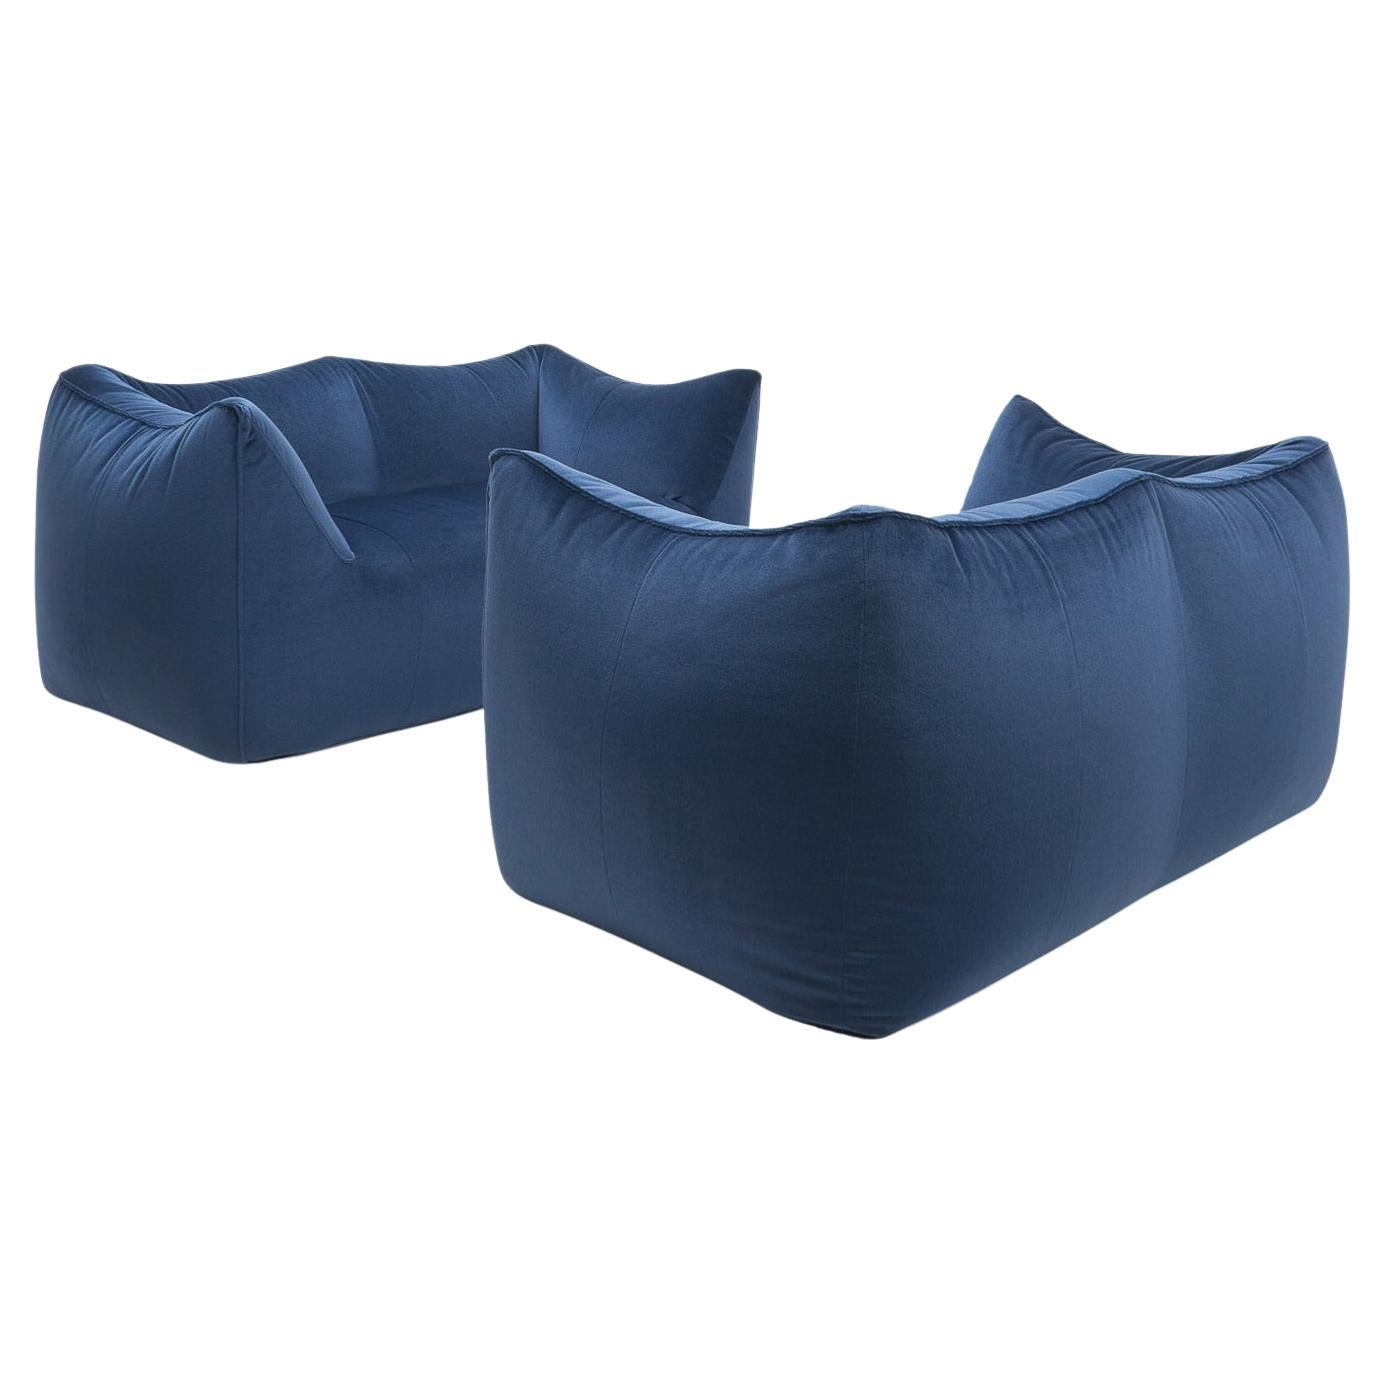 Iconic set of two seater sofas by Mario Bellini for B&B Italia, originating from the 1980s.


We have selected Musco, a dark blue mohair from De Ploeg, the Netherlands: 

Mohair has as an advantage that it is a natural material, very durable, easy